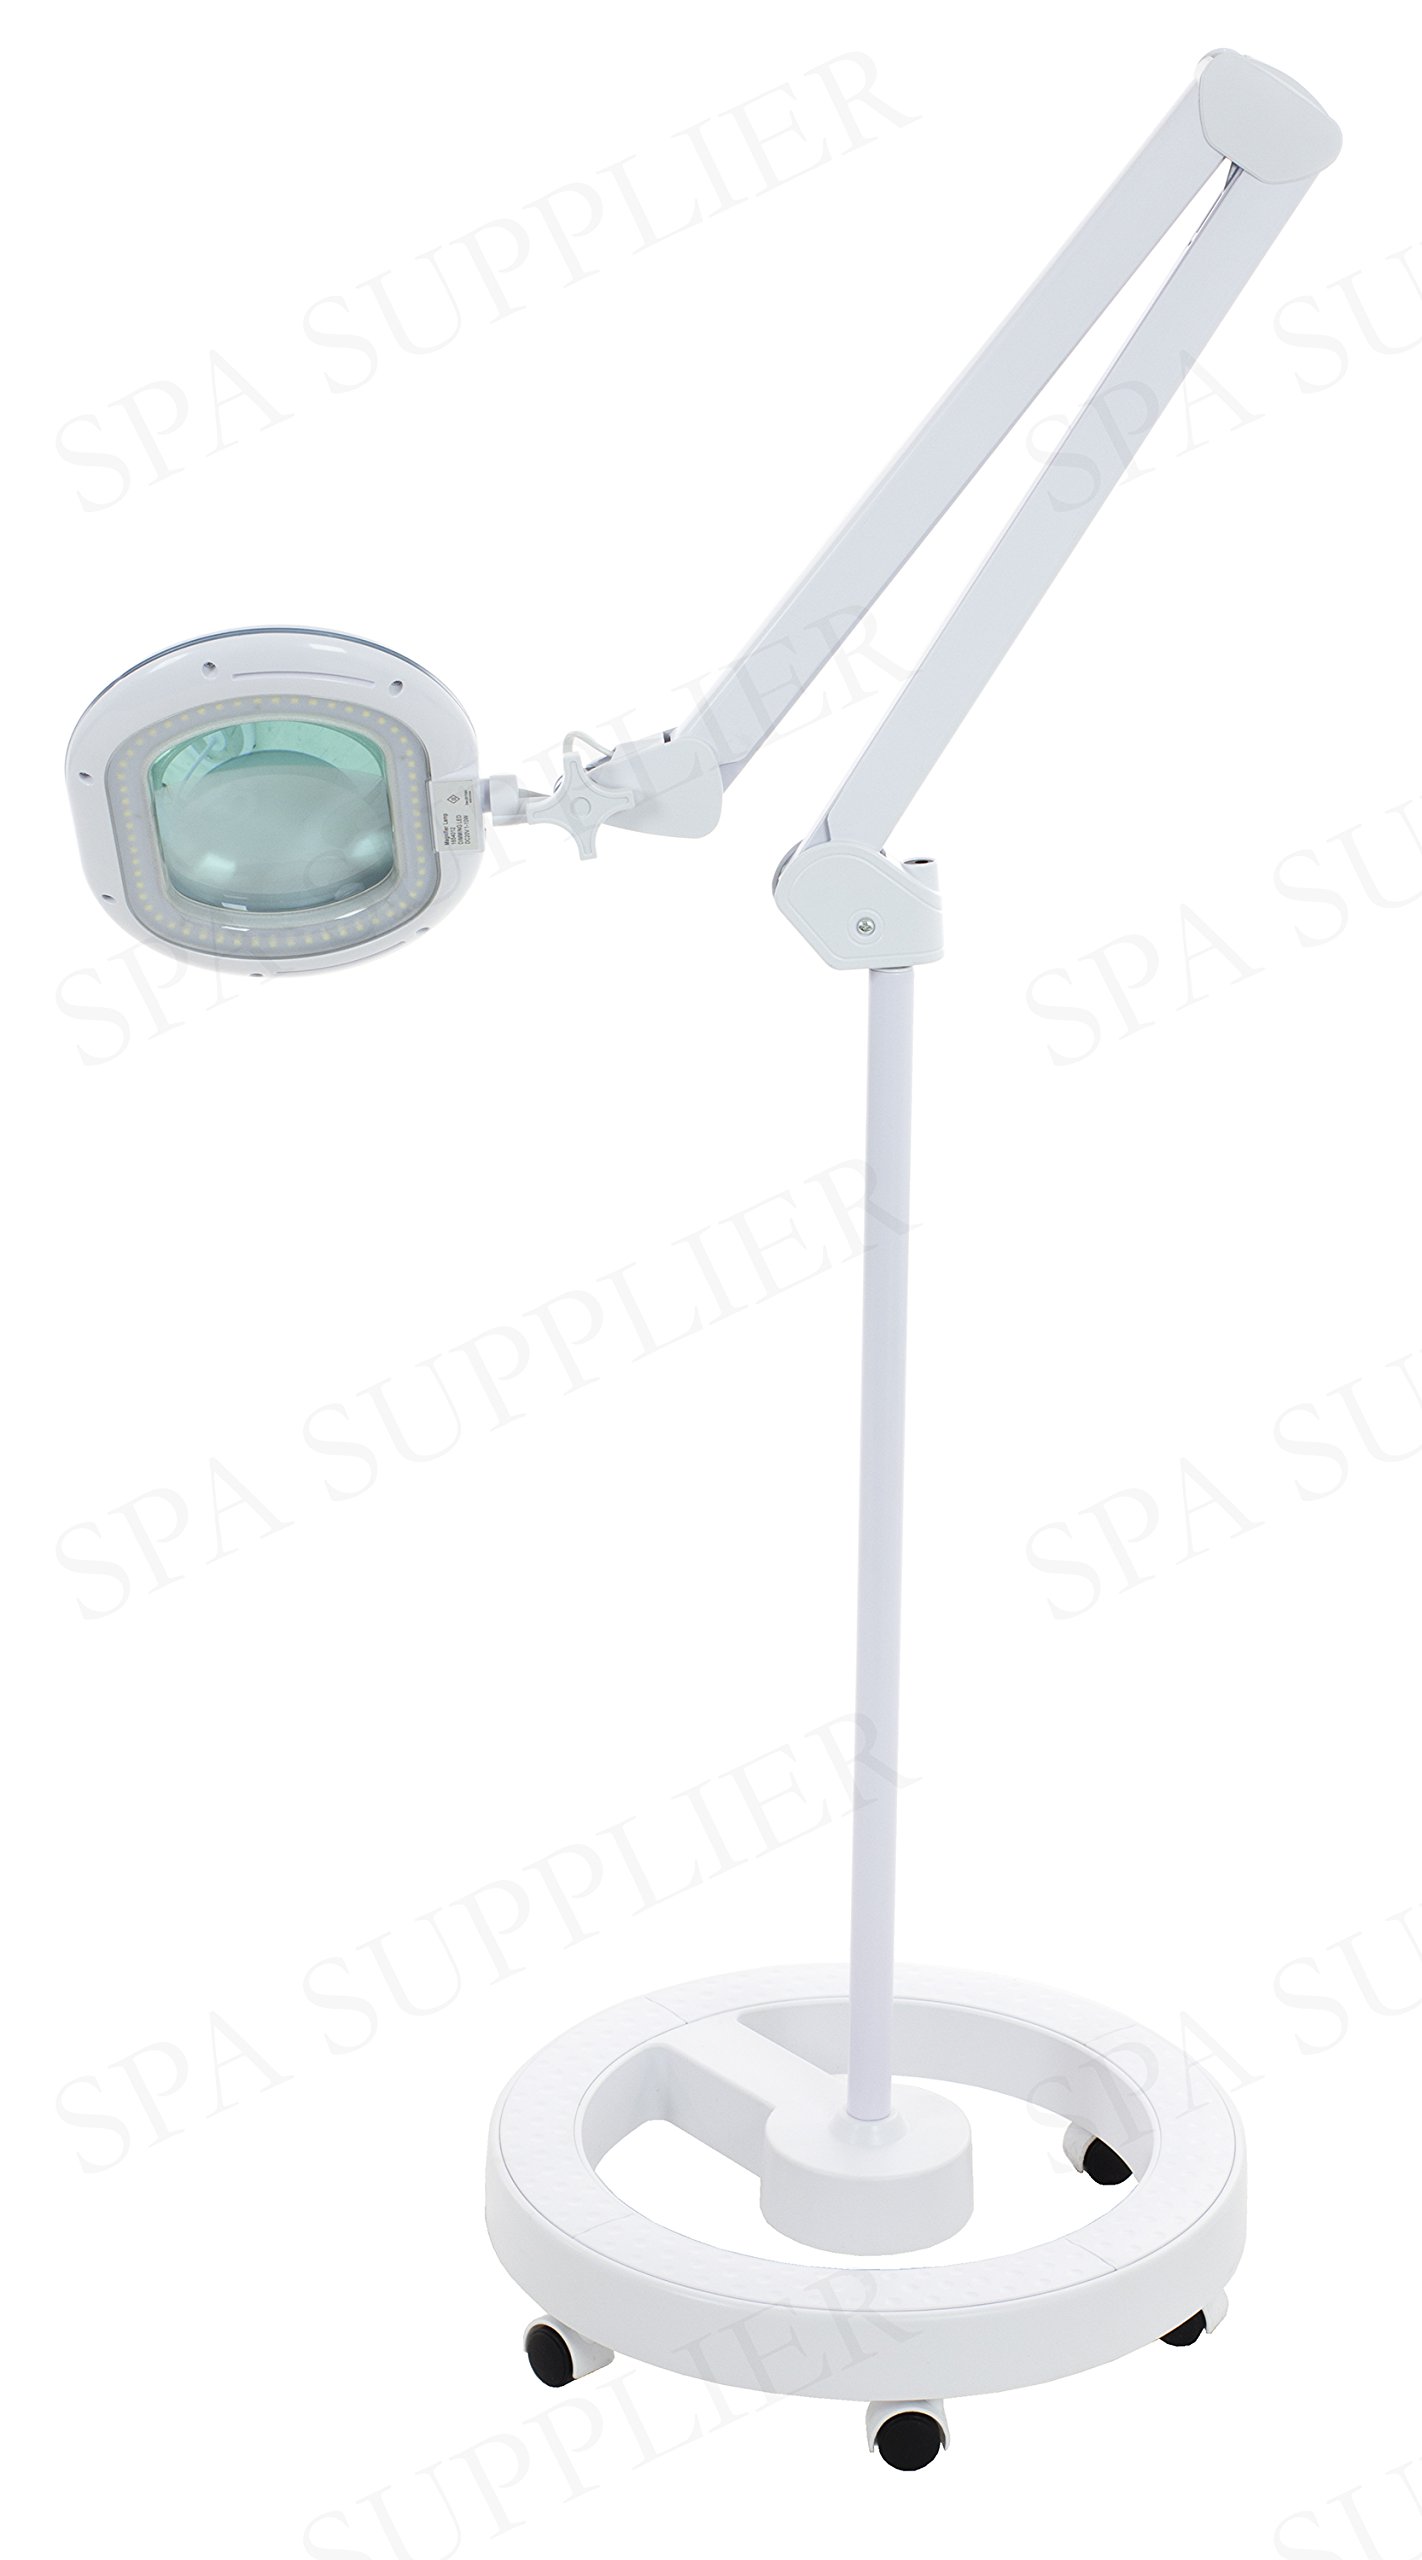 Pro Series ELEMENTO LED (5X Diopter) Magnifying Lamp with Large Glass 5.5" Diameter and Touch Control Brightening Adjustment System